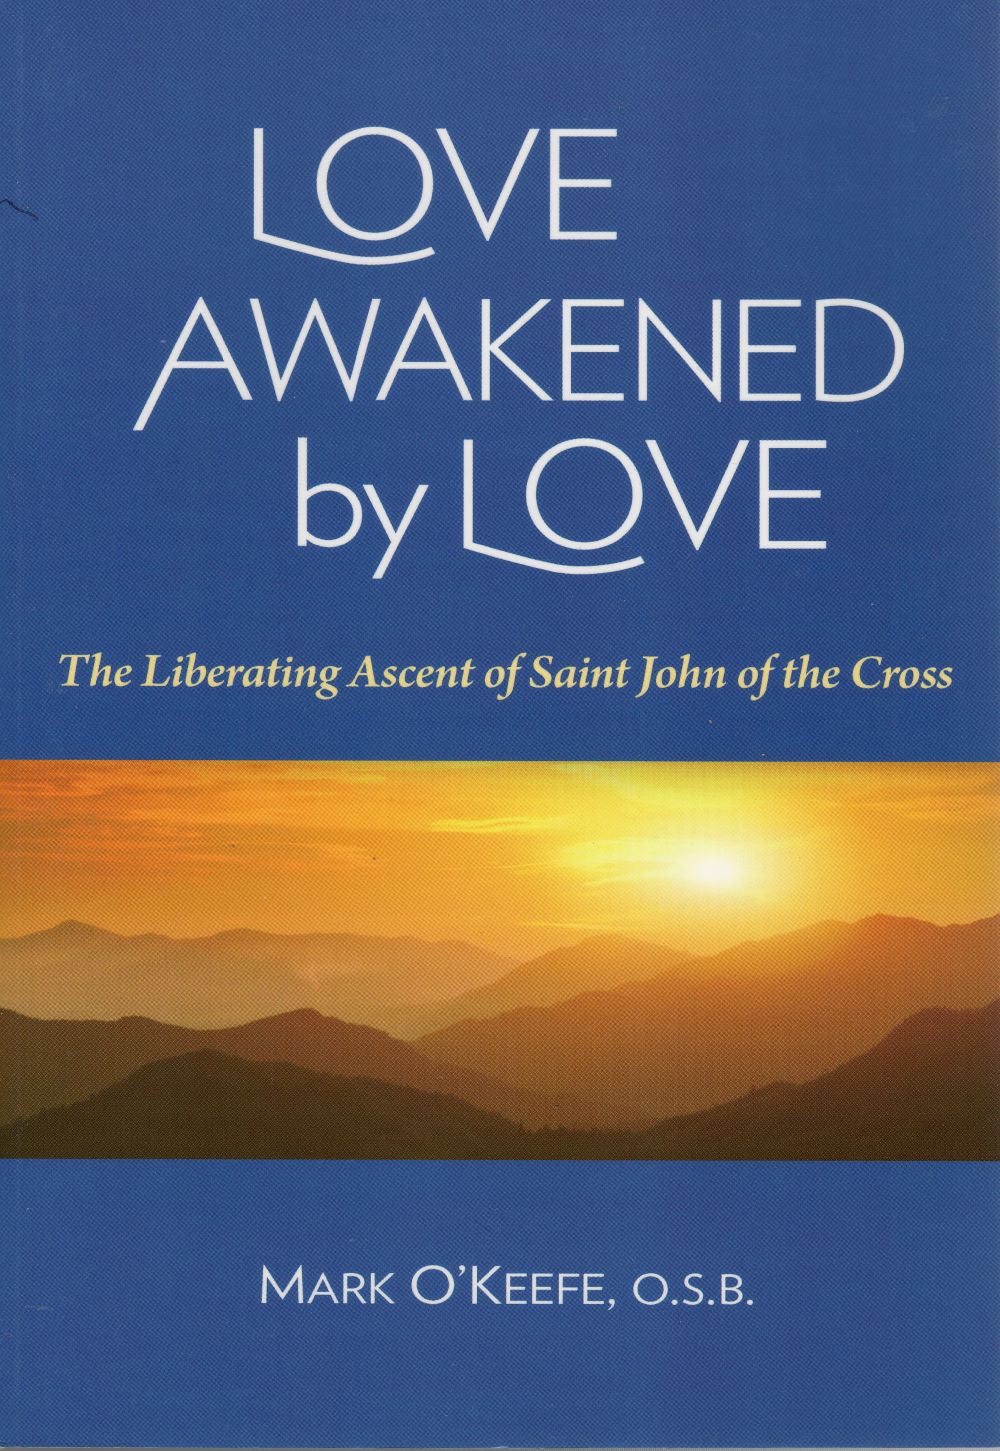 LOVE AWAKENED BY LOVE: The Liberating Ascent of Saint John of the Cross (2014)